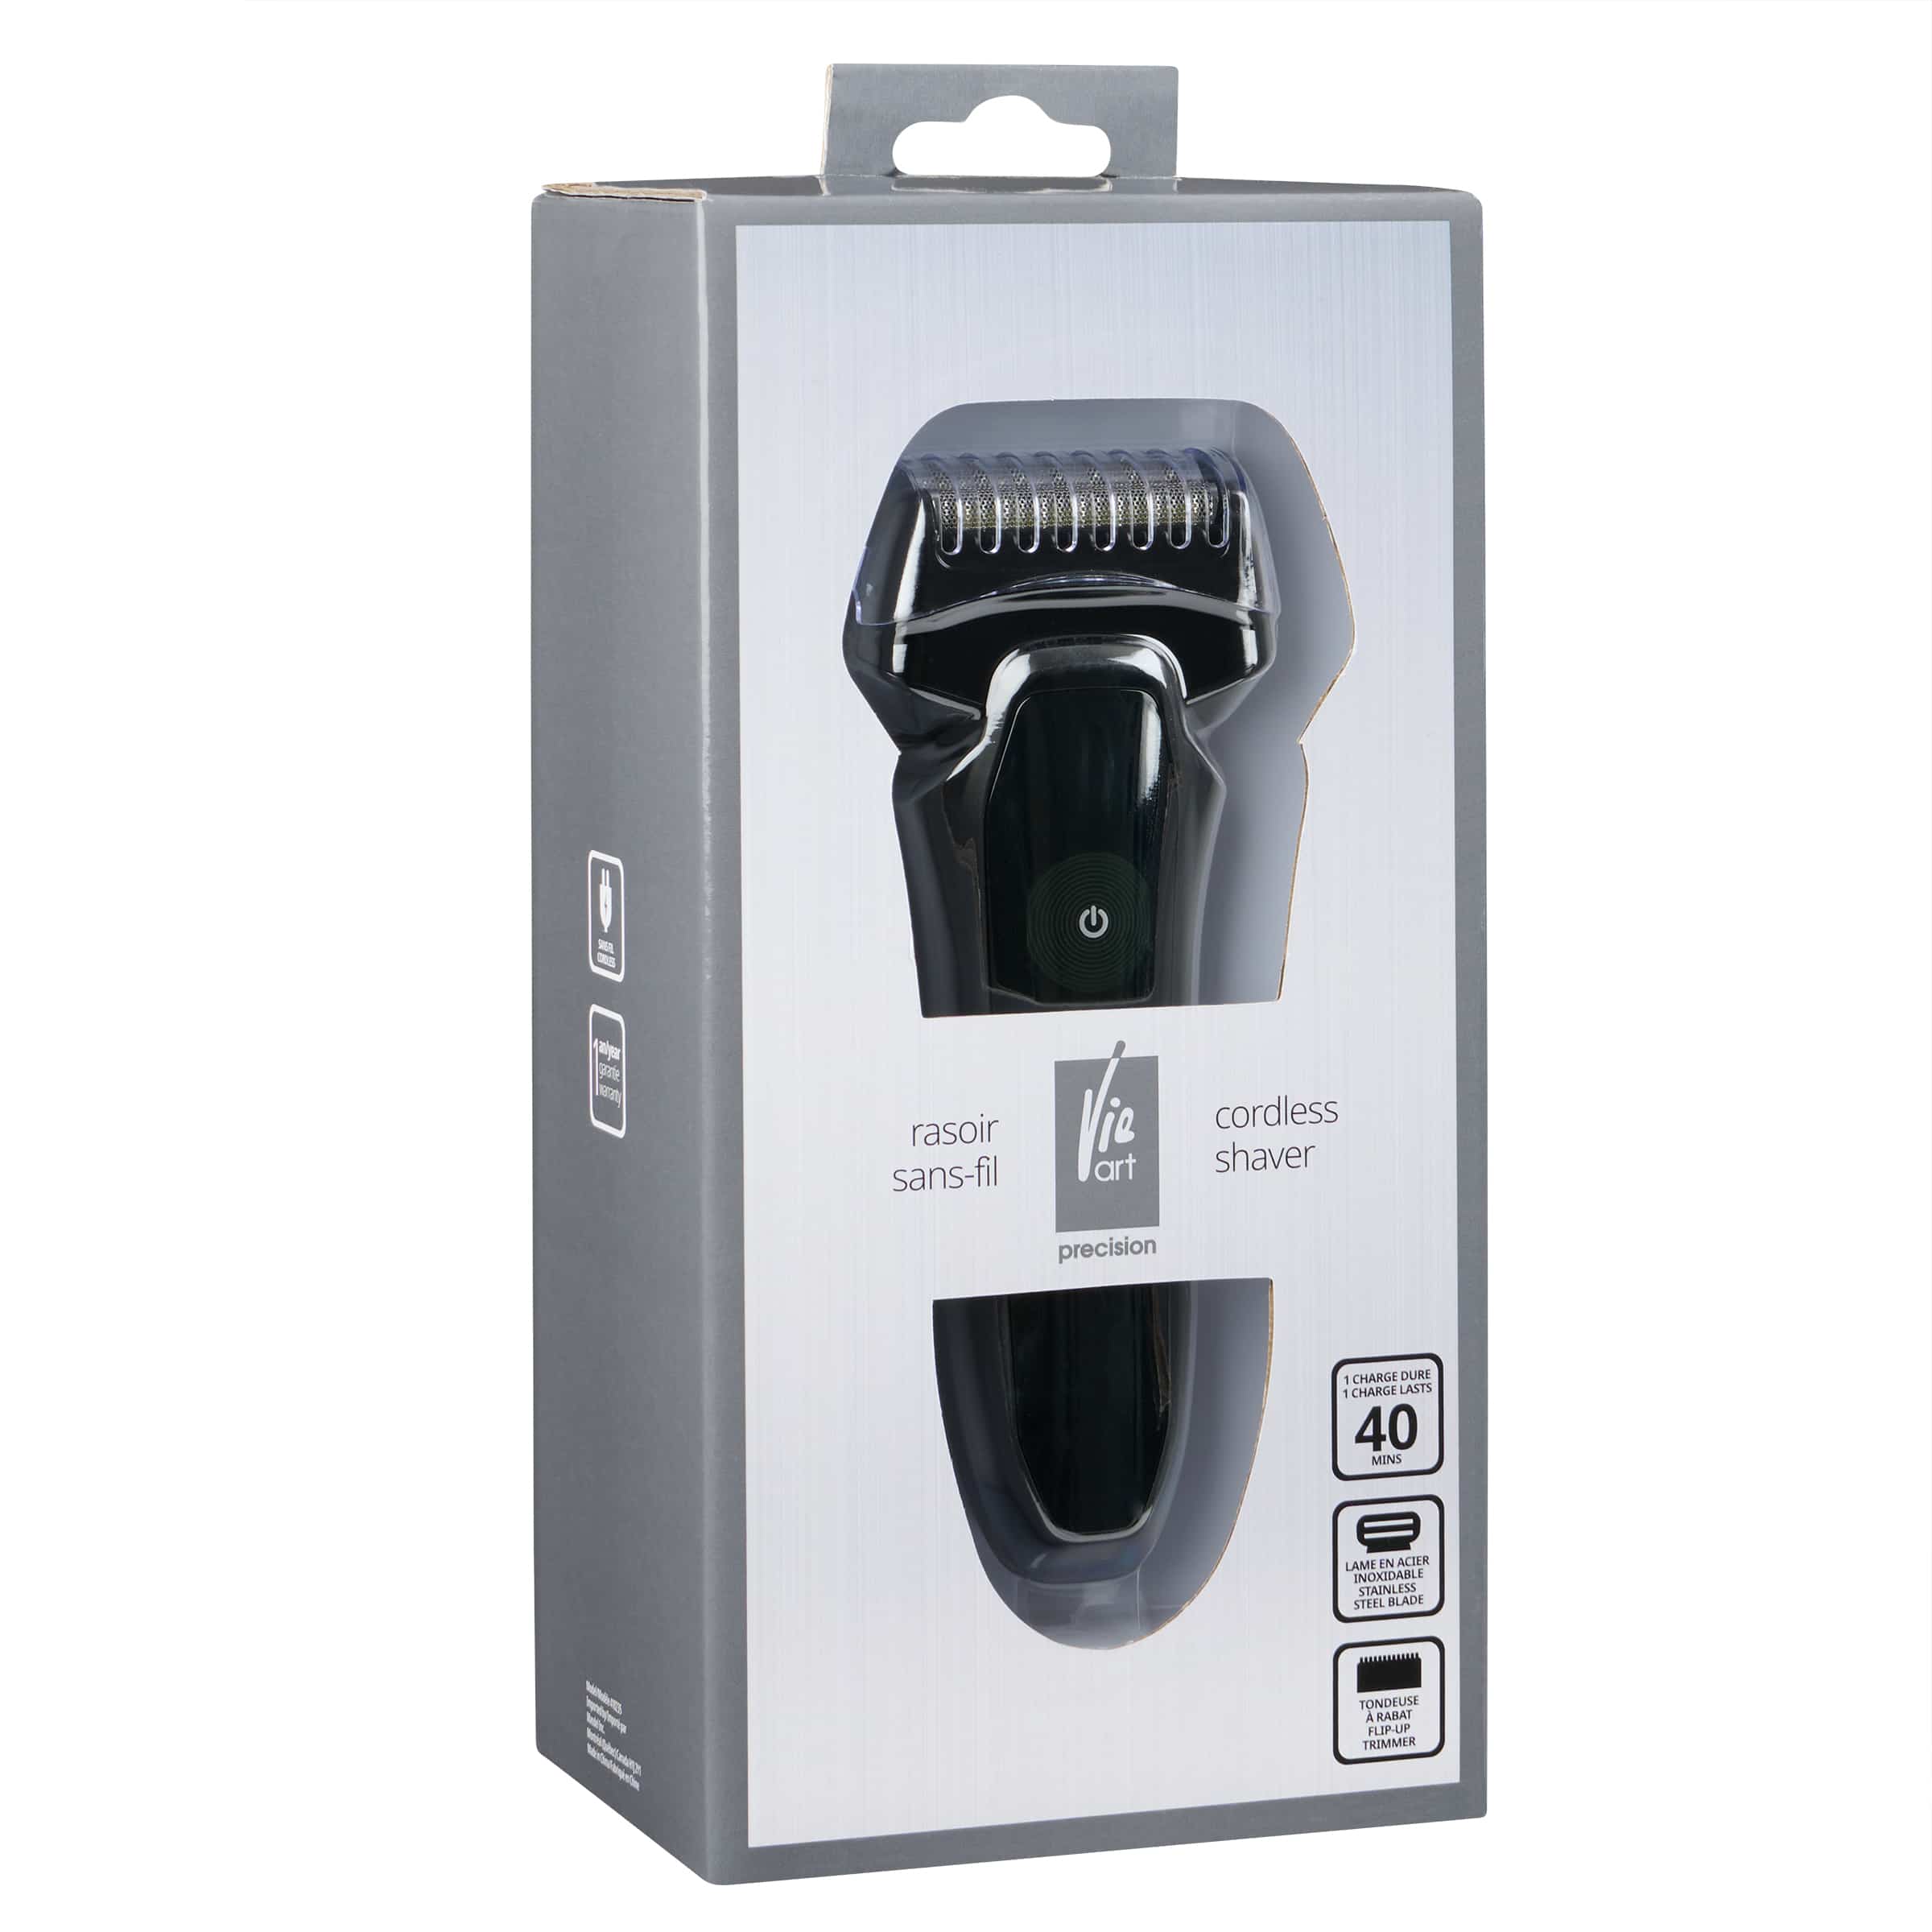 Cordless rechargeable shaver – wet or dry usage